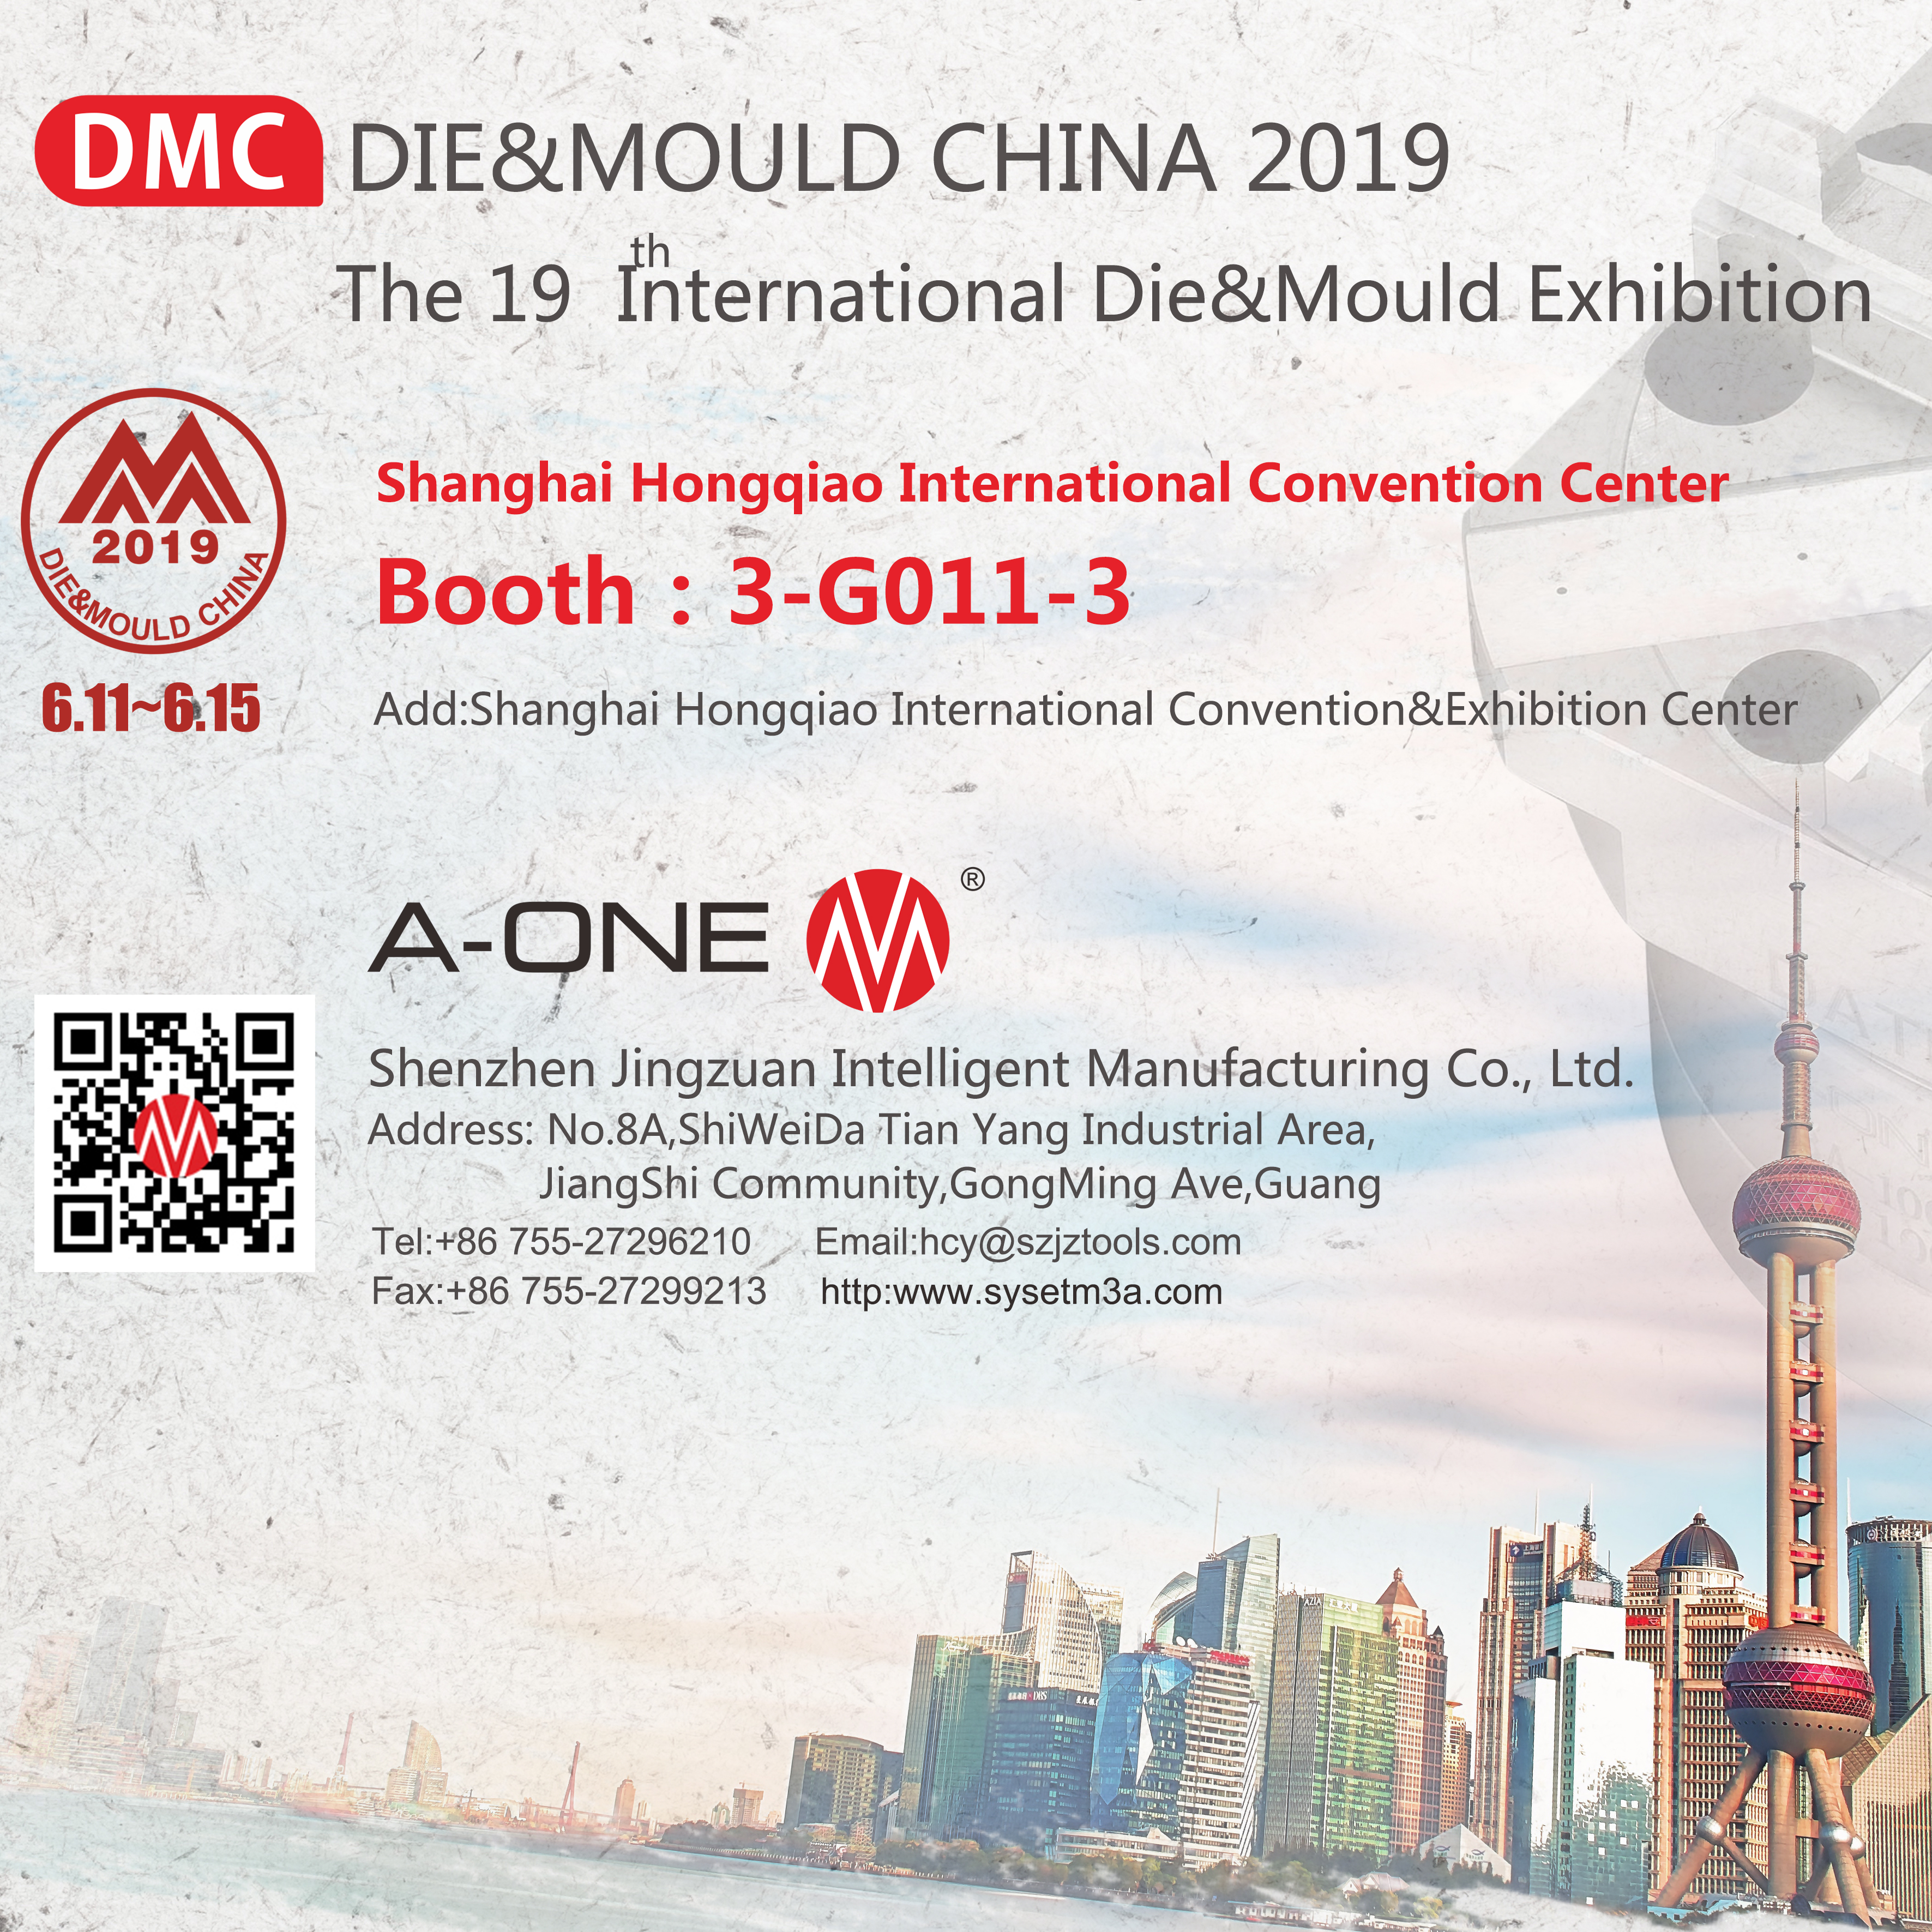 DMC DIE&MOULD CHINA 2019 The 19th International Die&Mould Exhibition